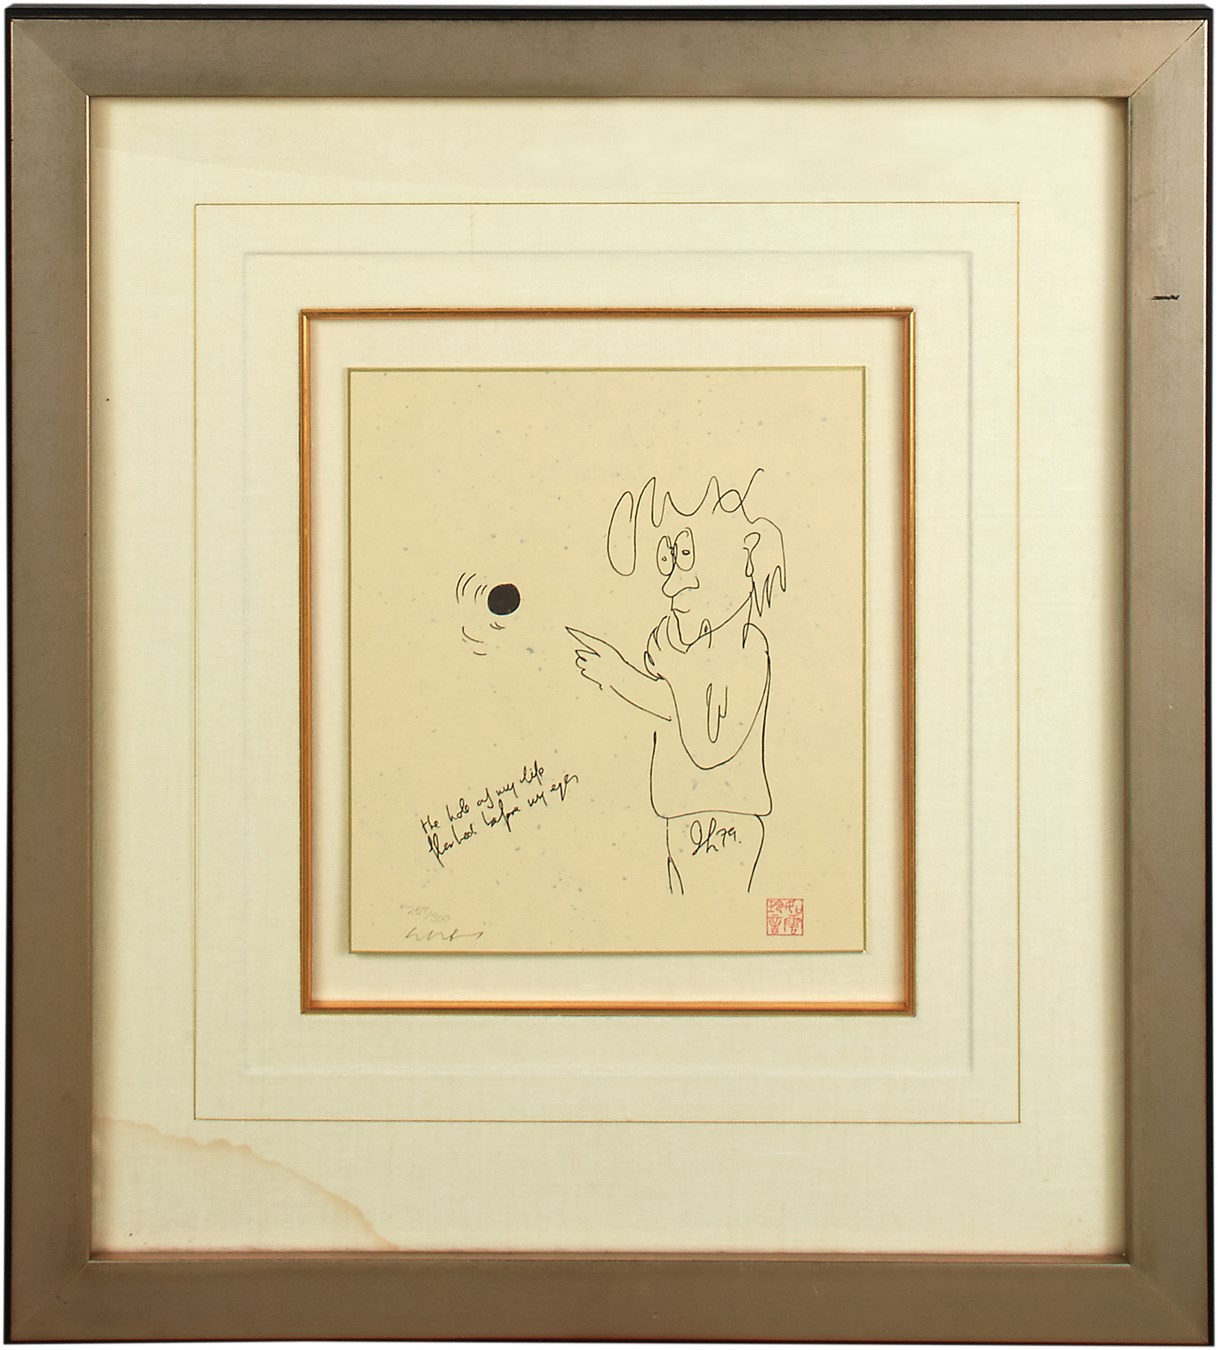 Pop Culture Autographs - "Hole of My Life" Limited Edition Print by John Lennon